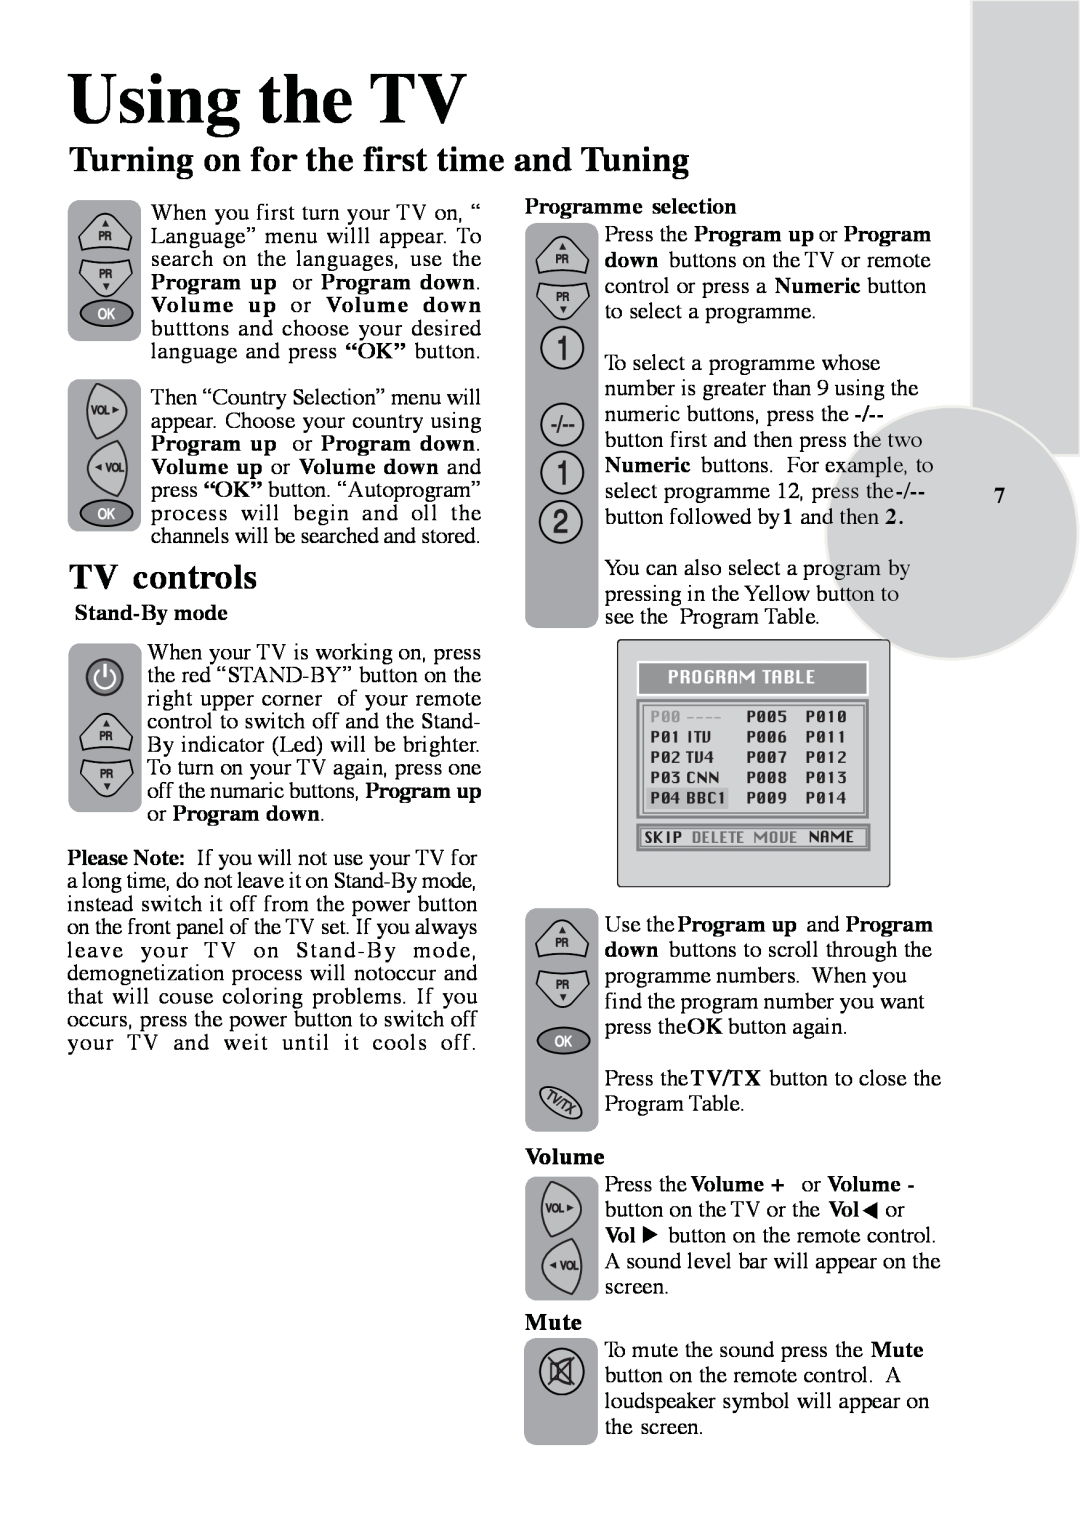 ITT 29-100-1 ST manual Using the TV, Turning on for the first time and Tuning, TV controls, Volume, Mute, Stand-By mode 